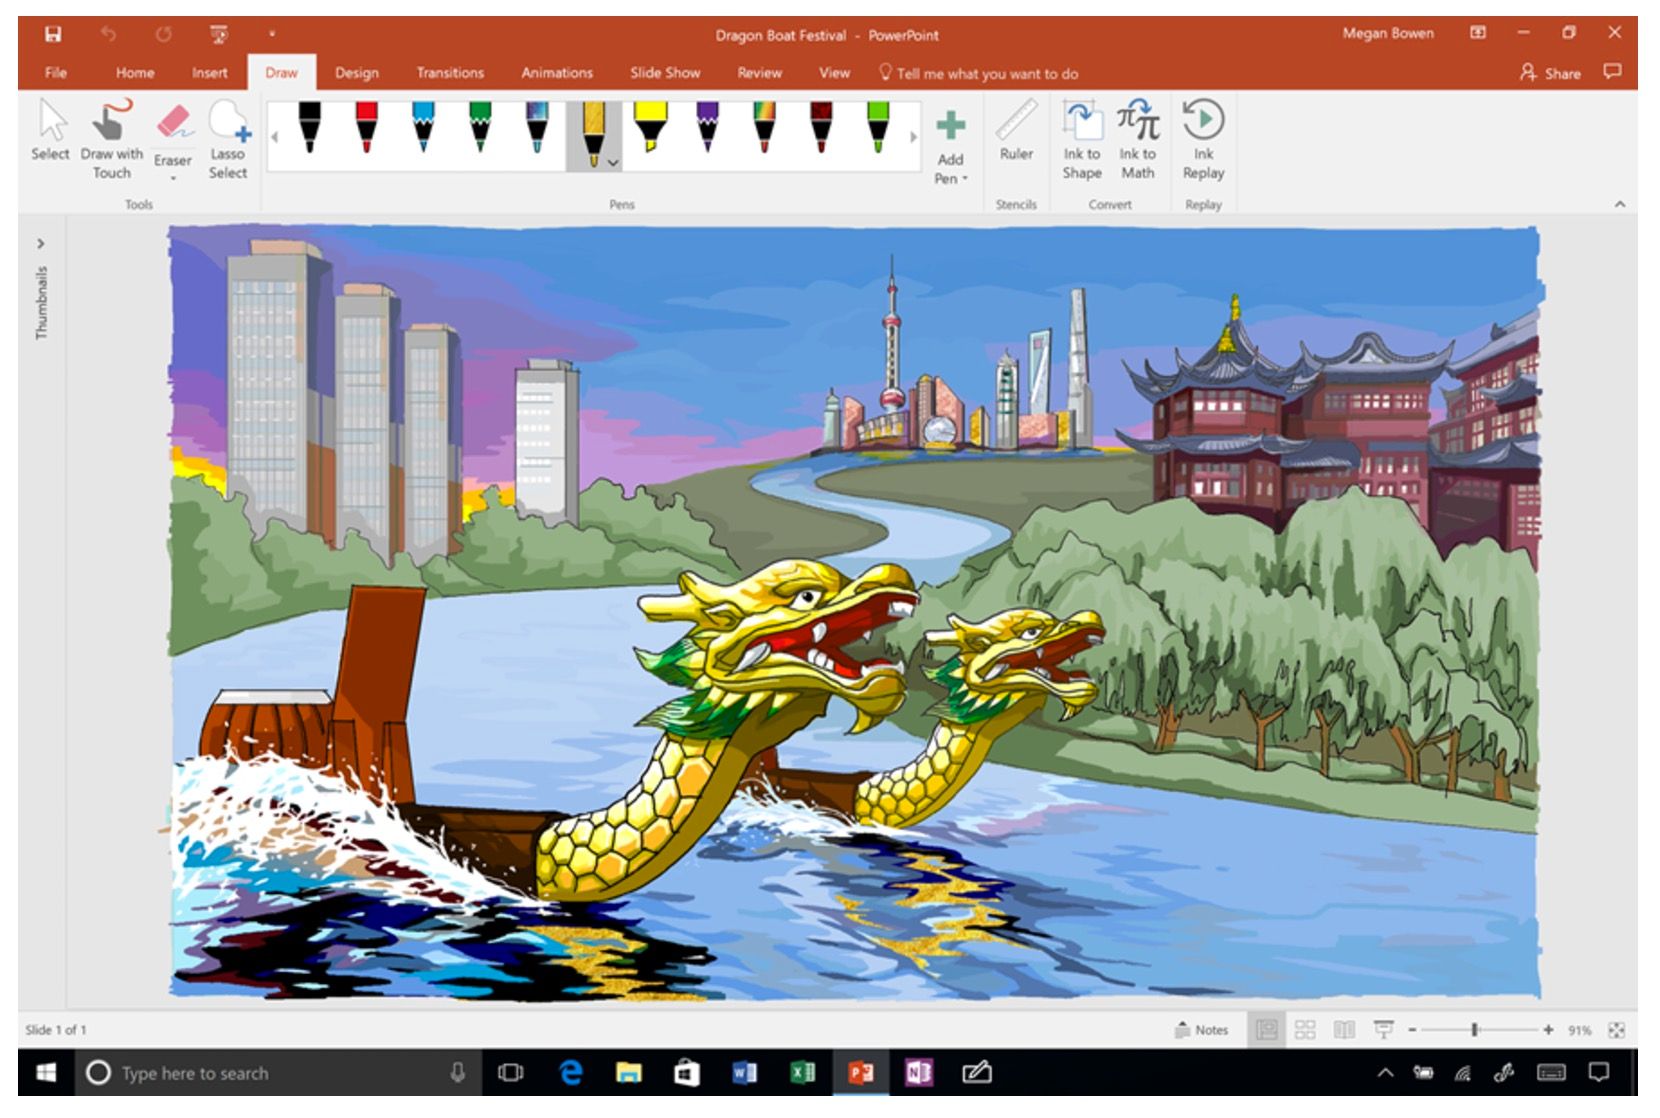 whiteboard is microsoft s windows 10 app for collaborative inking image 1